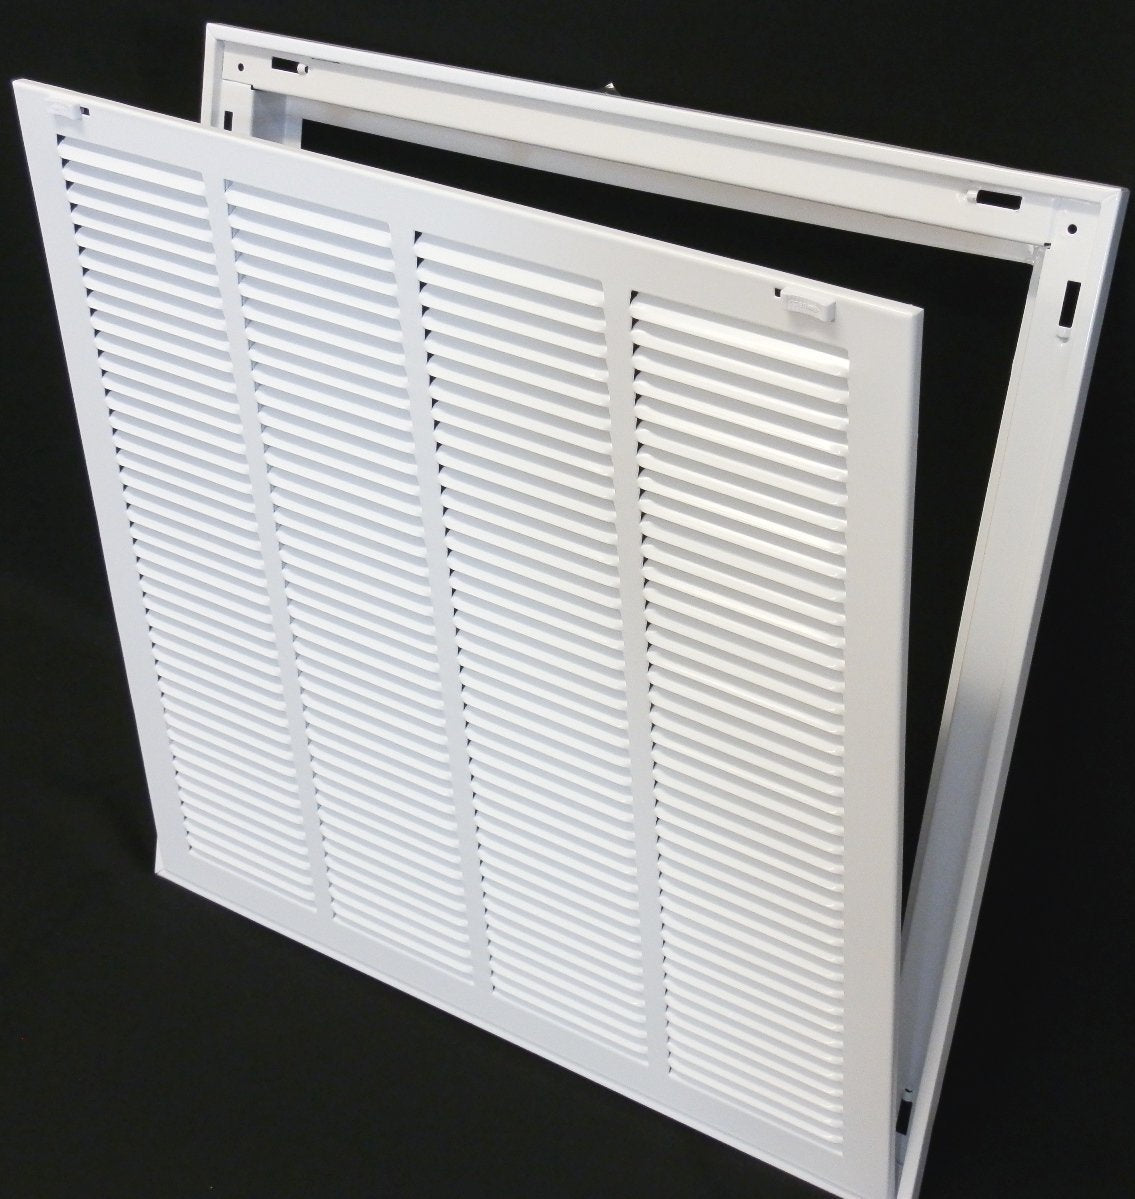 22&quot; X 8&quot; Steel Return Air Filter Grille for 1&quot; Filter - Removable Frame - [Outer Dimensions: 24 5/8&quot; X 10 5/8&quot;]